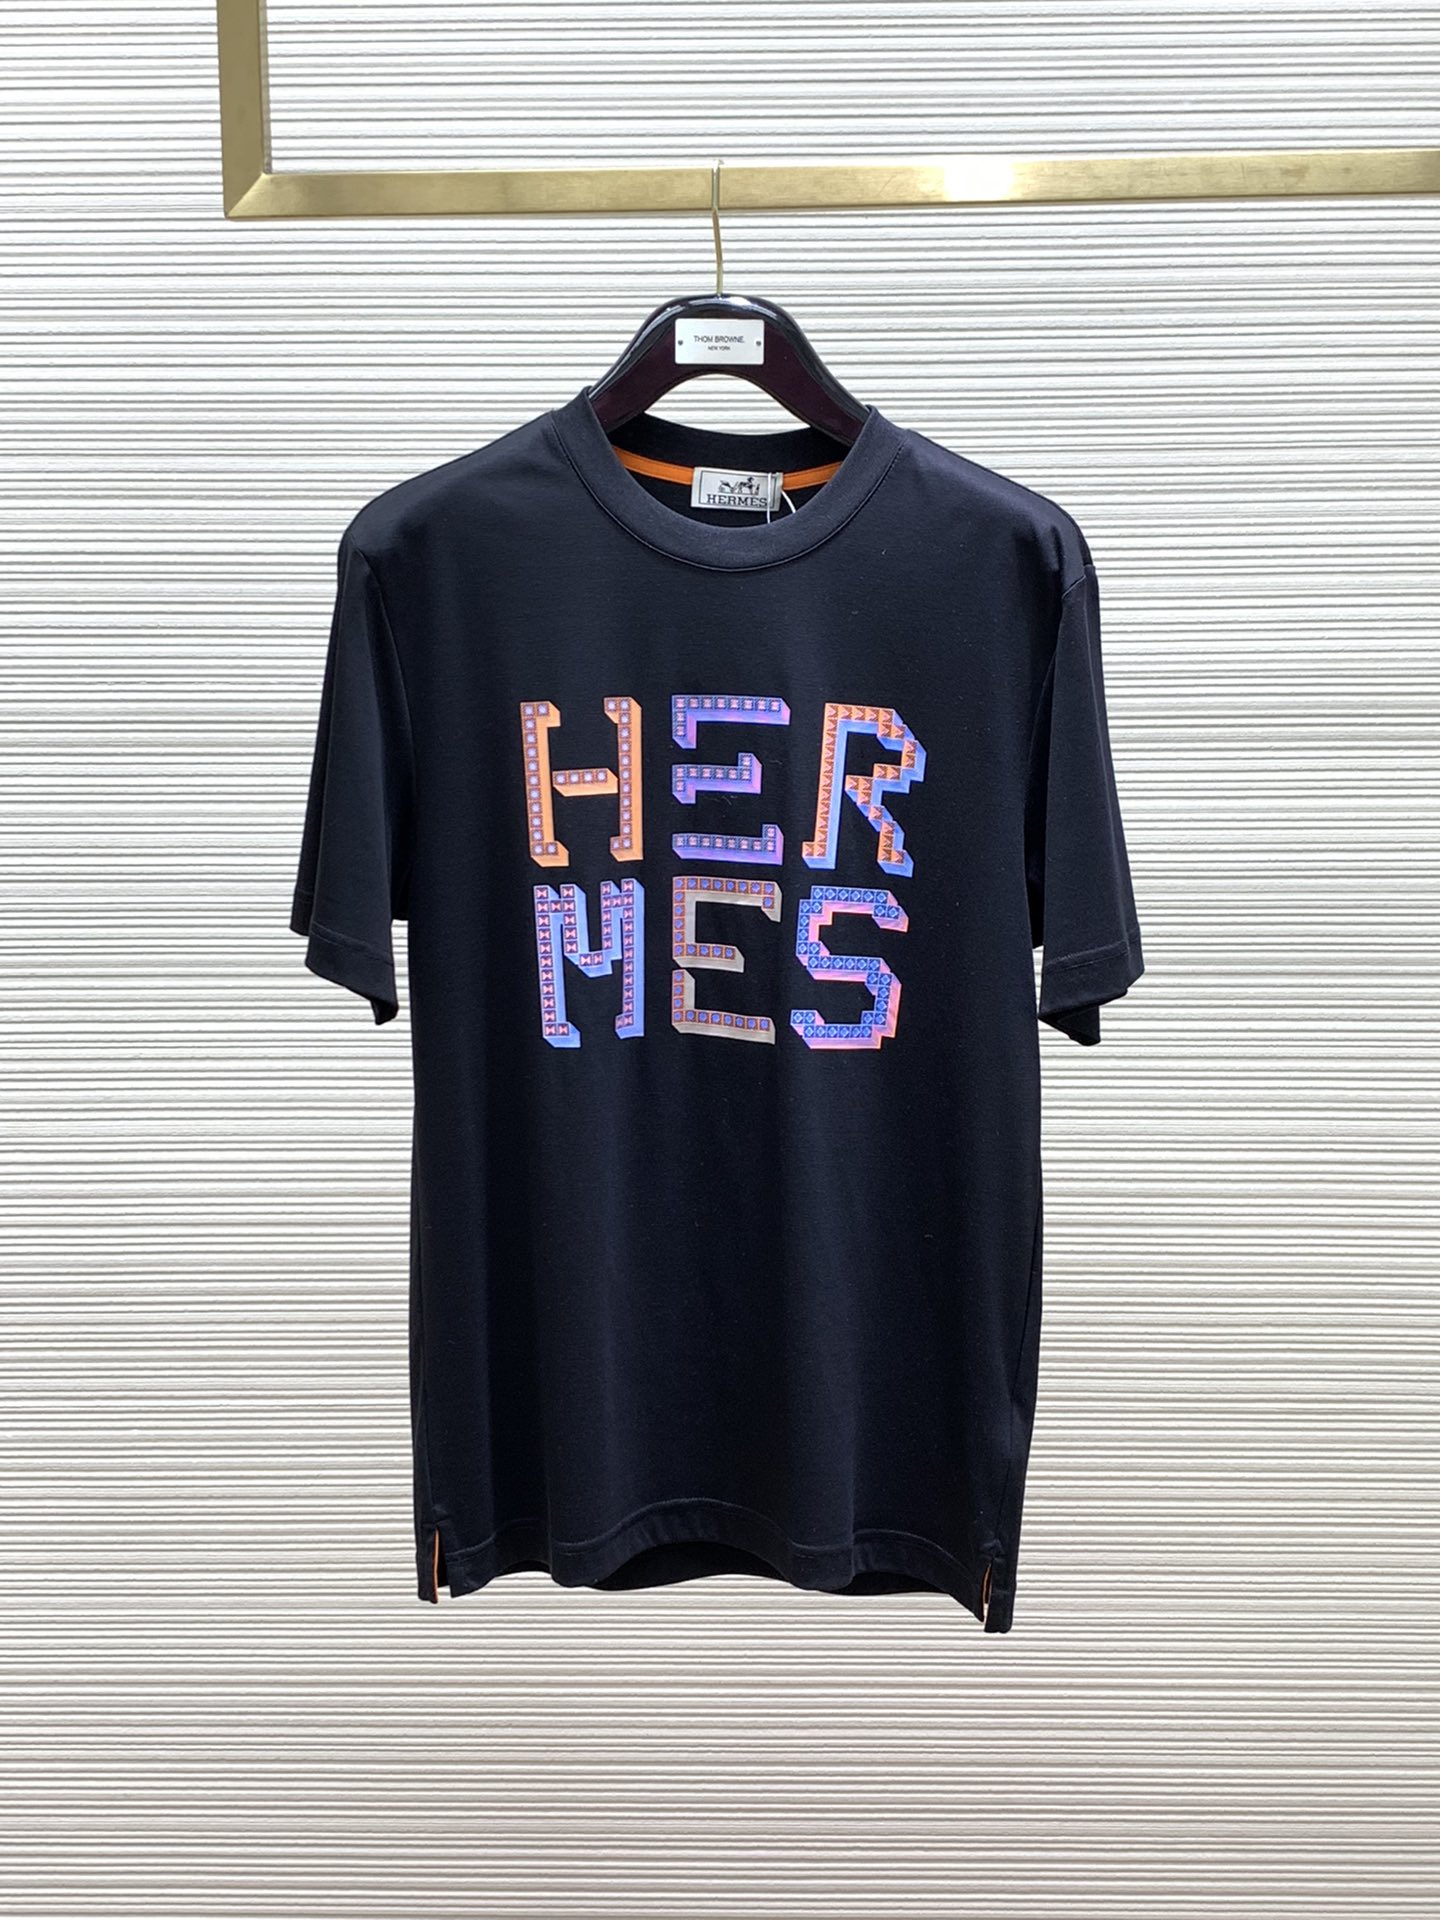 Hermes Clothing T-Shirt Printing Cotton Fall Collection Short Sleeve